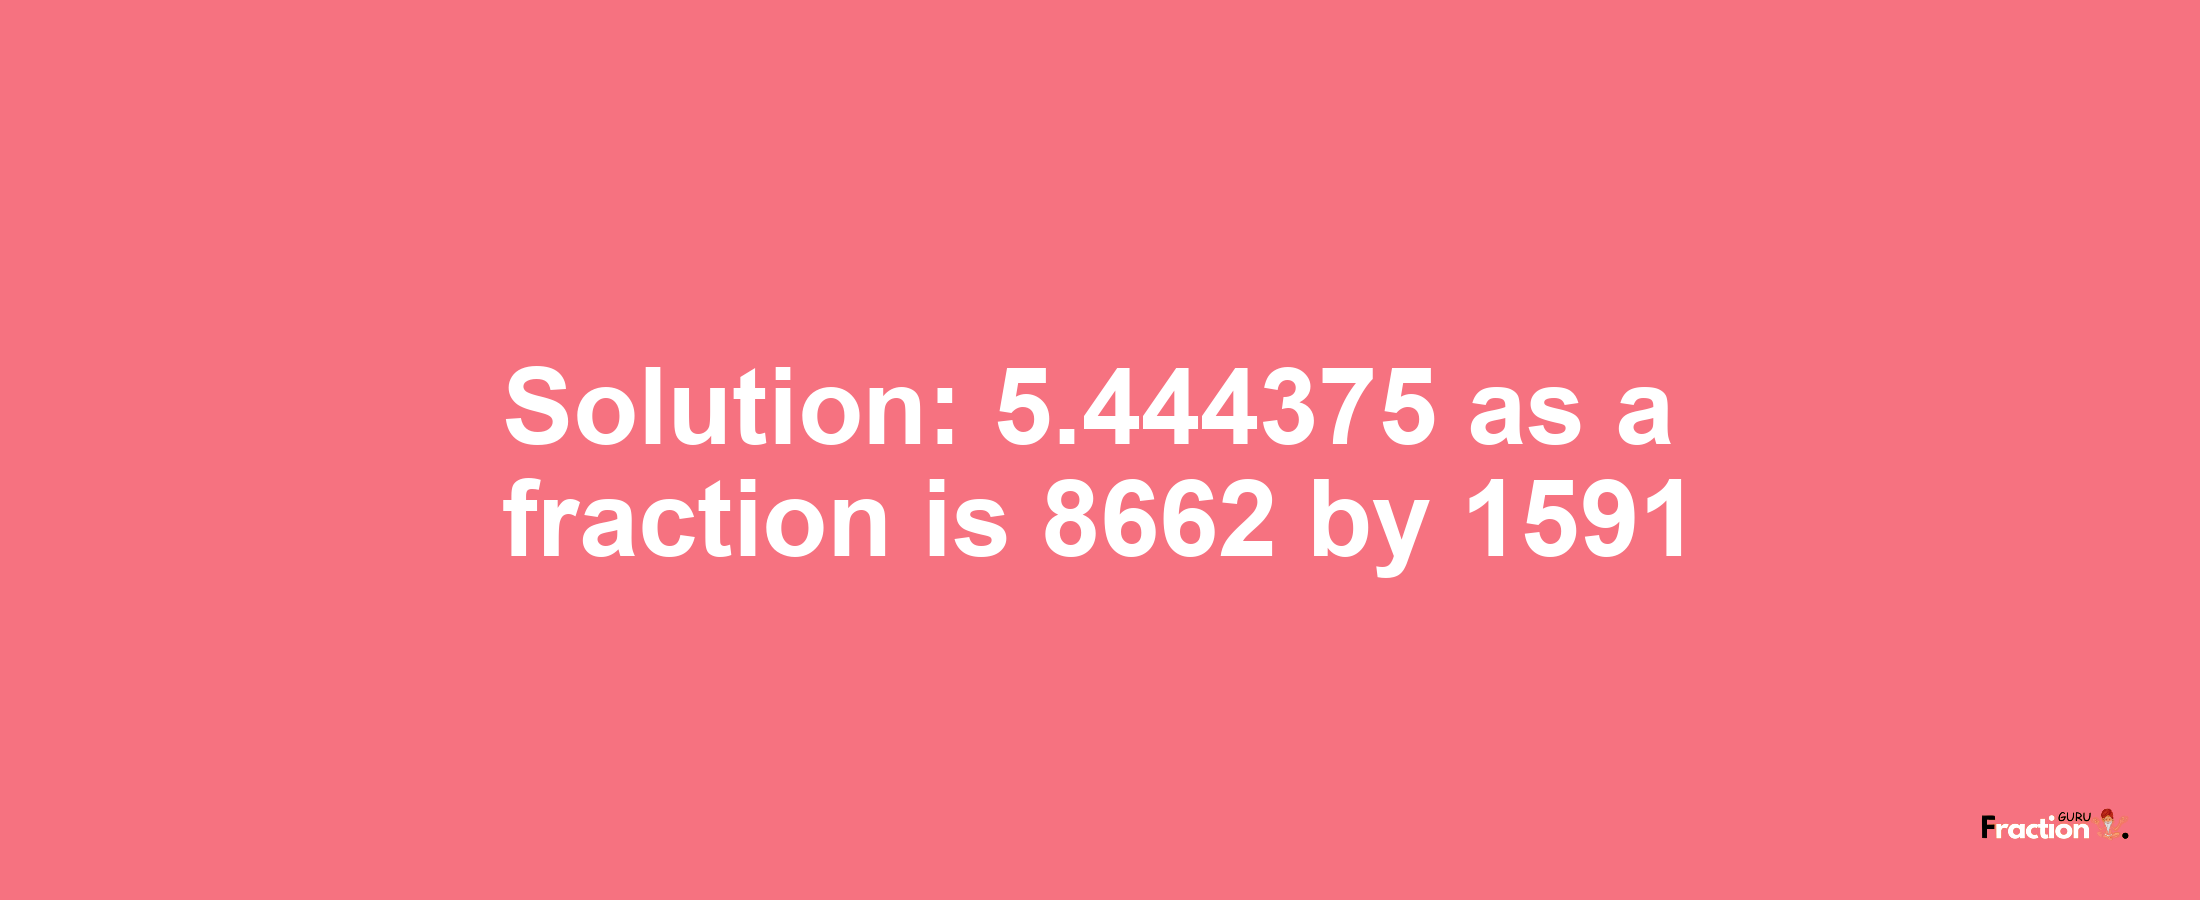 Solution:5.444375 as a fraction is 8662/1591